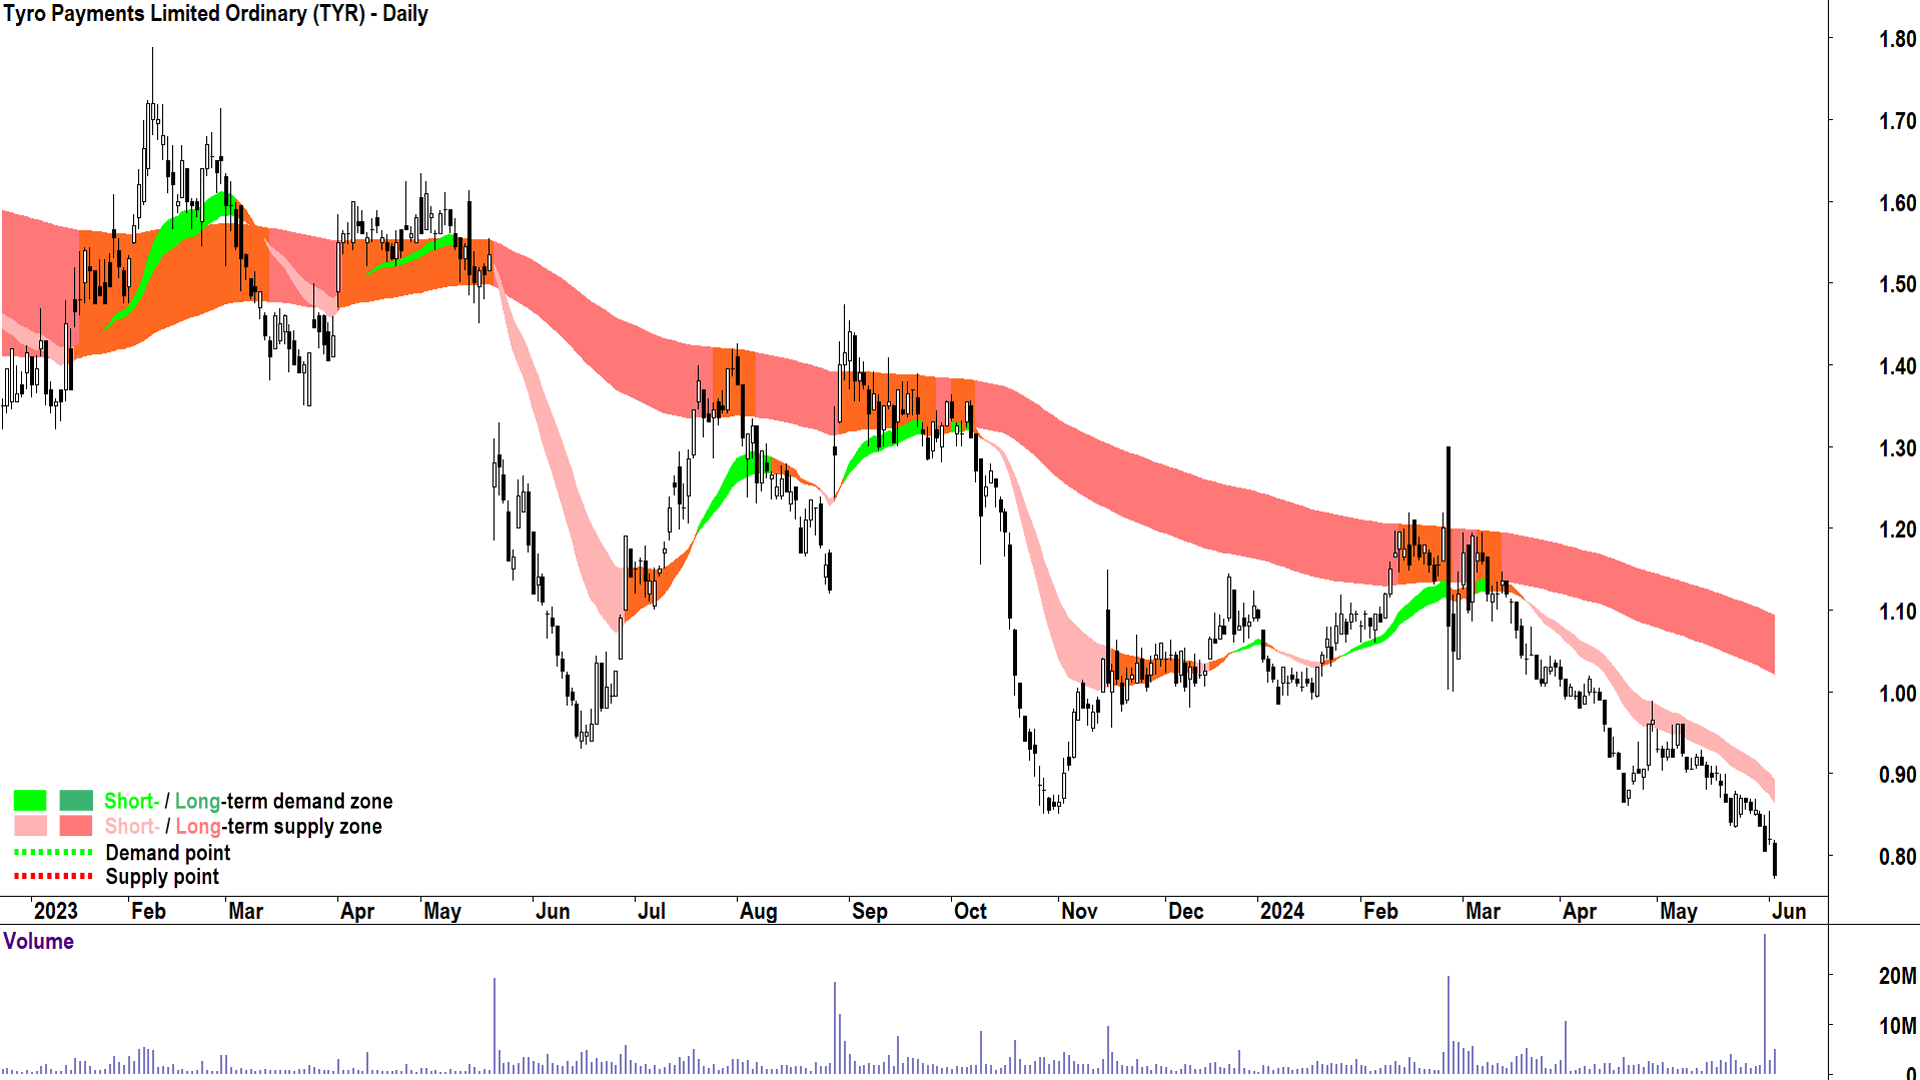 Tyro Payments (ASX-TYR) chart 4 June 2024